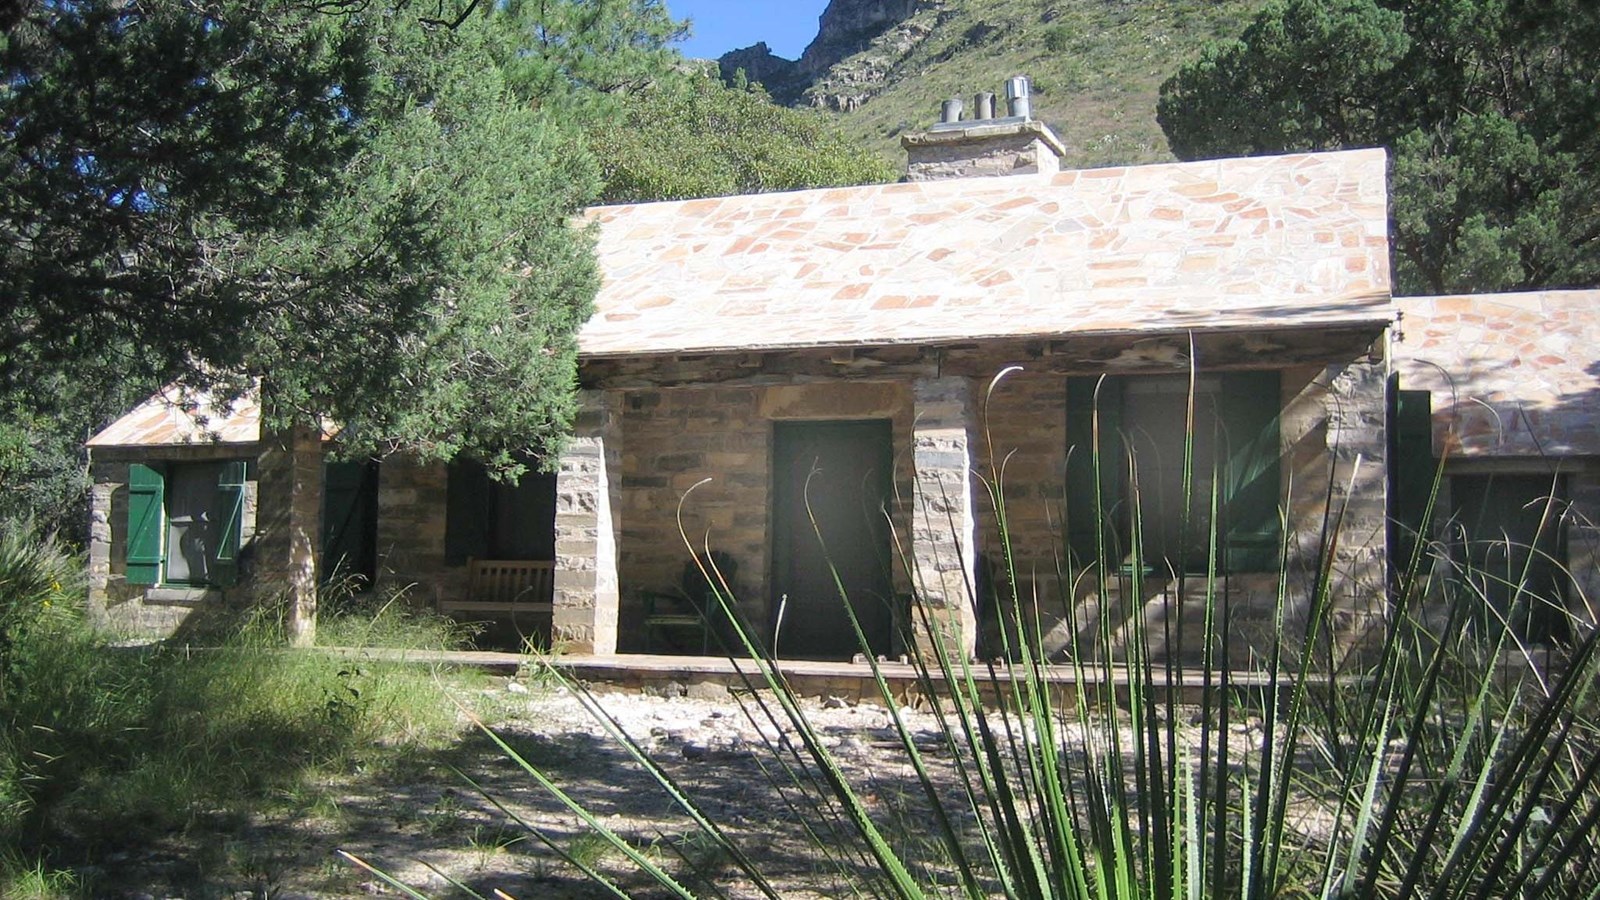 A cabin with stone walls and roof surrounded by desert mountain landscape and plants